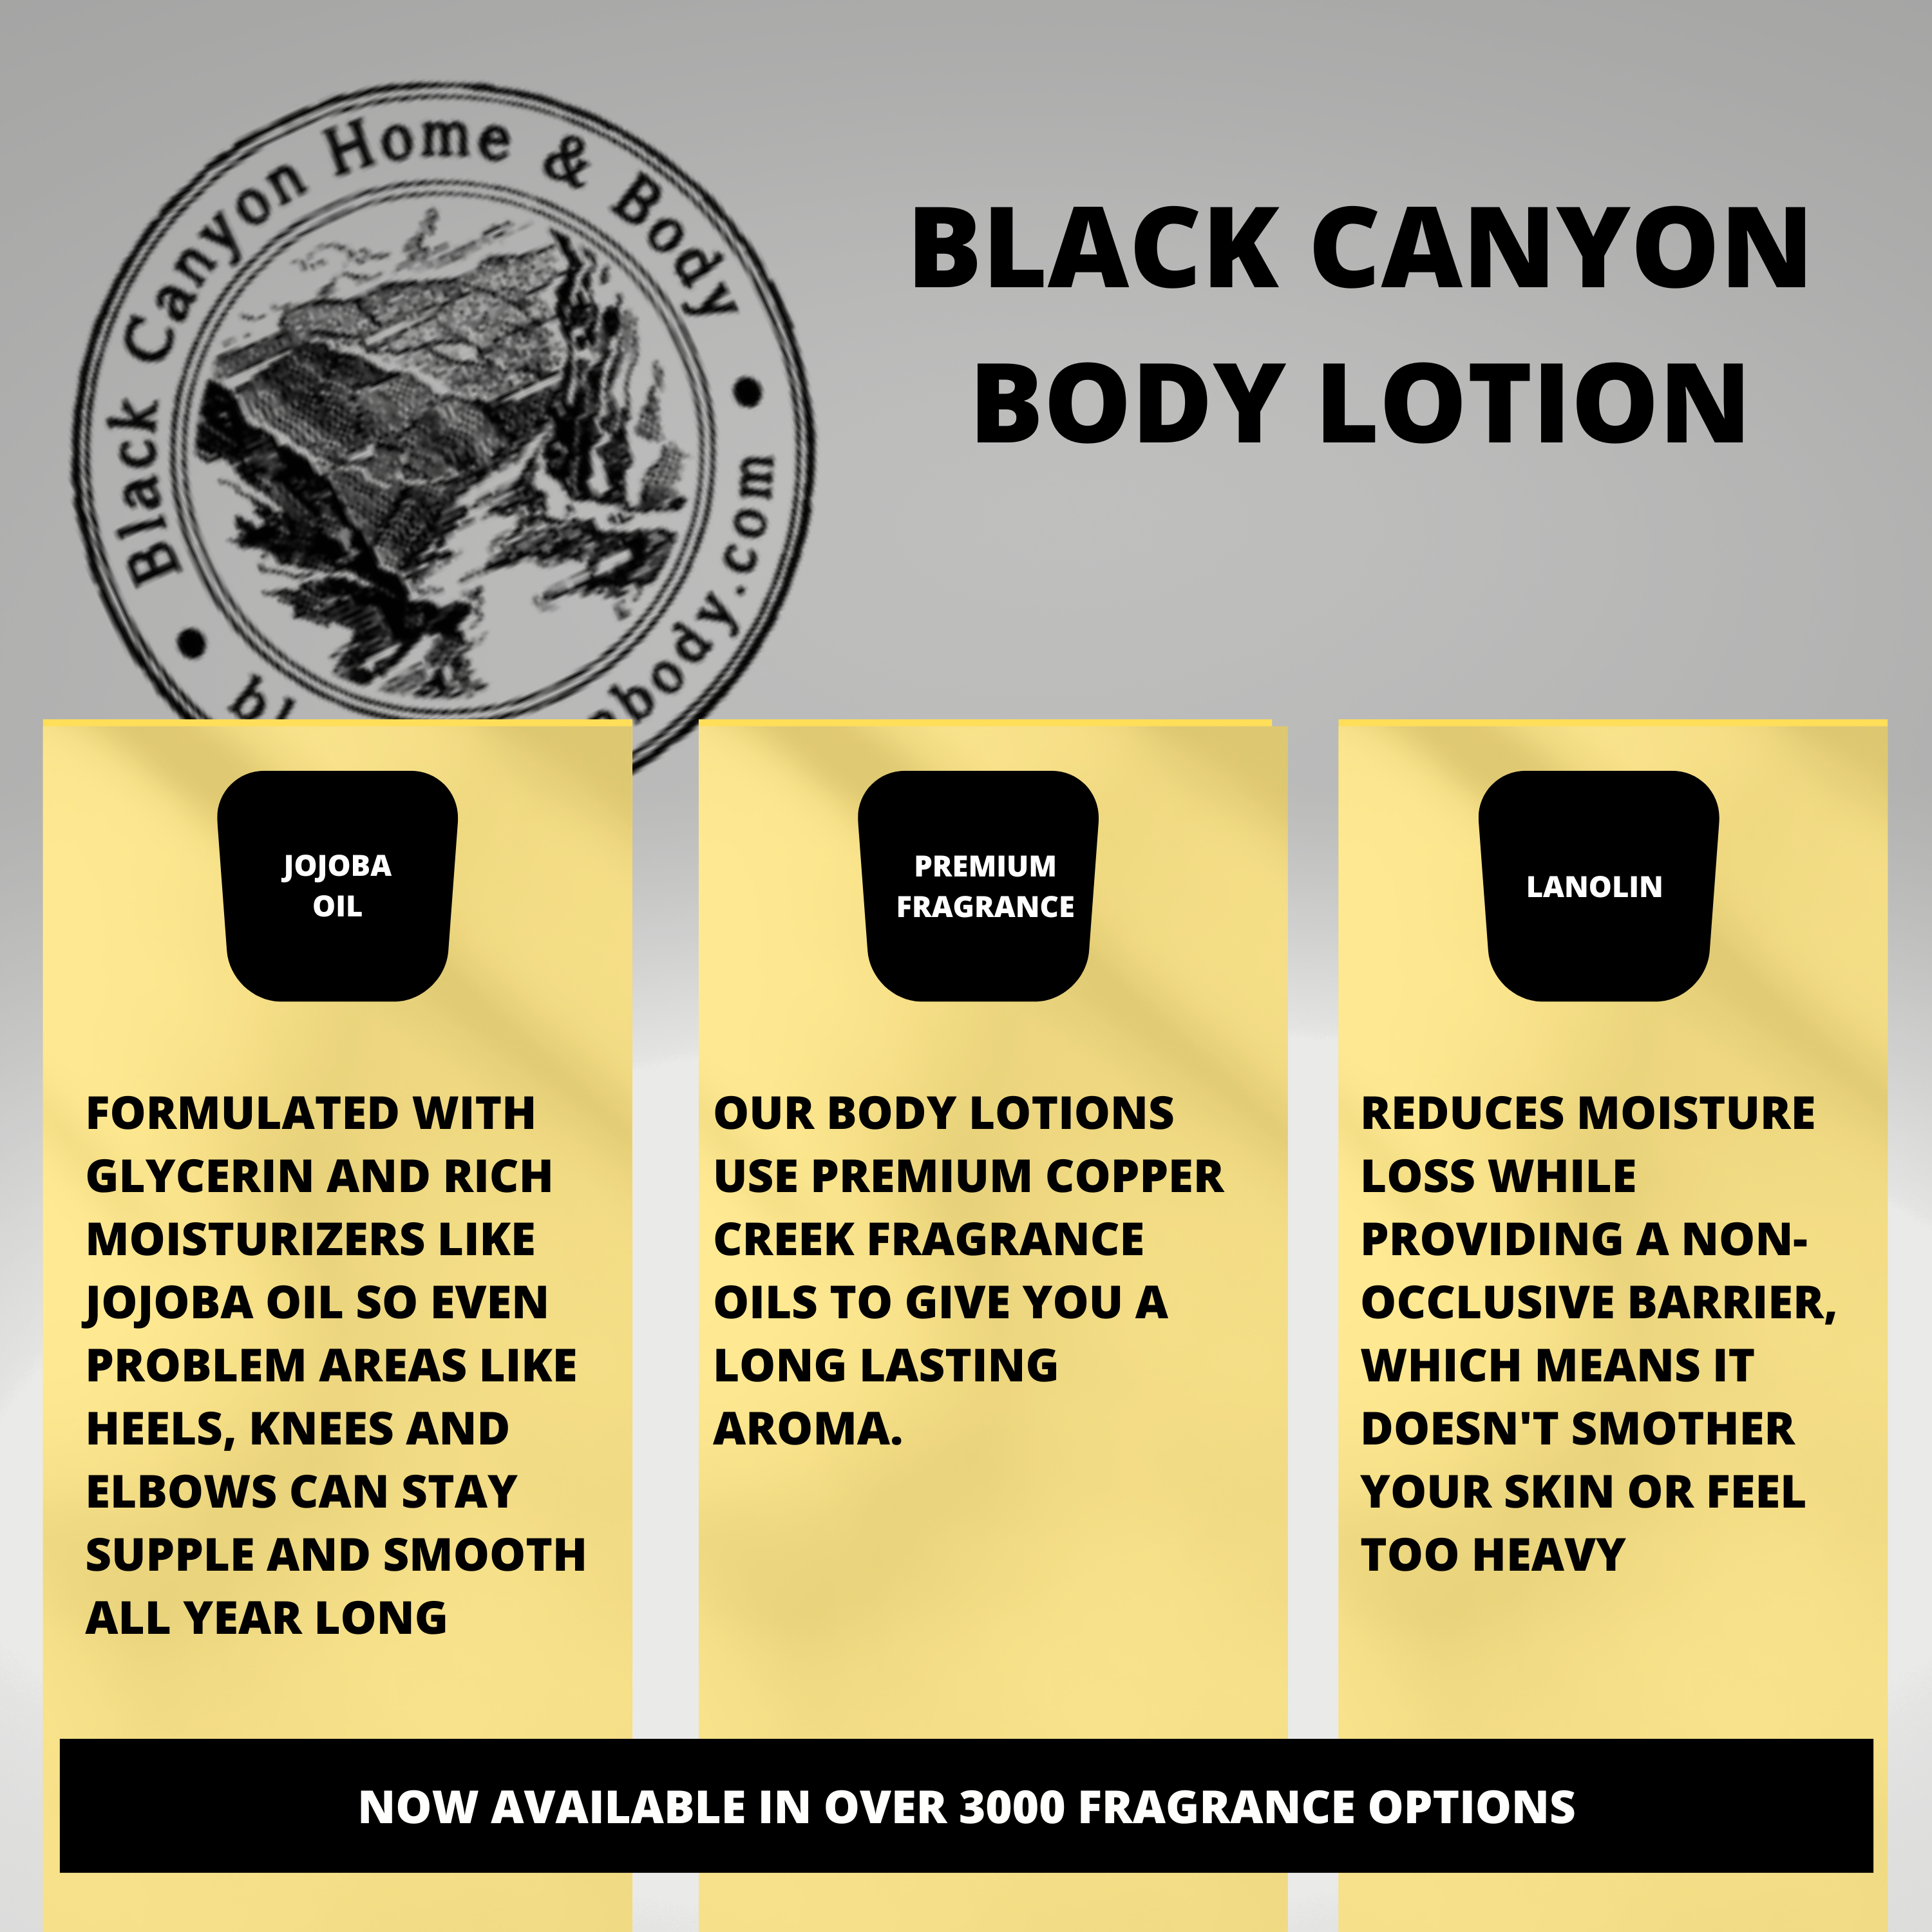 Black Canyon Vanilla Delight Scented Luxury Body Lotion with Lanolin and Jojoba Oil